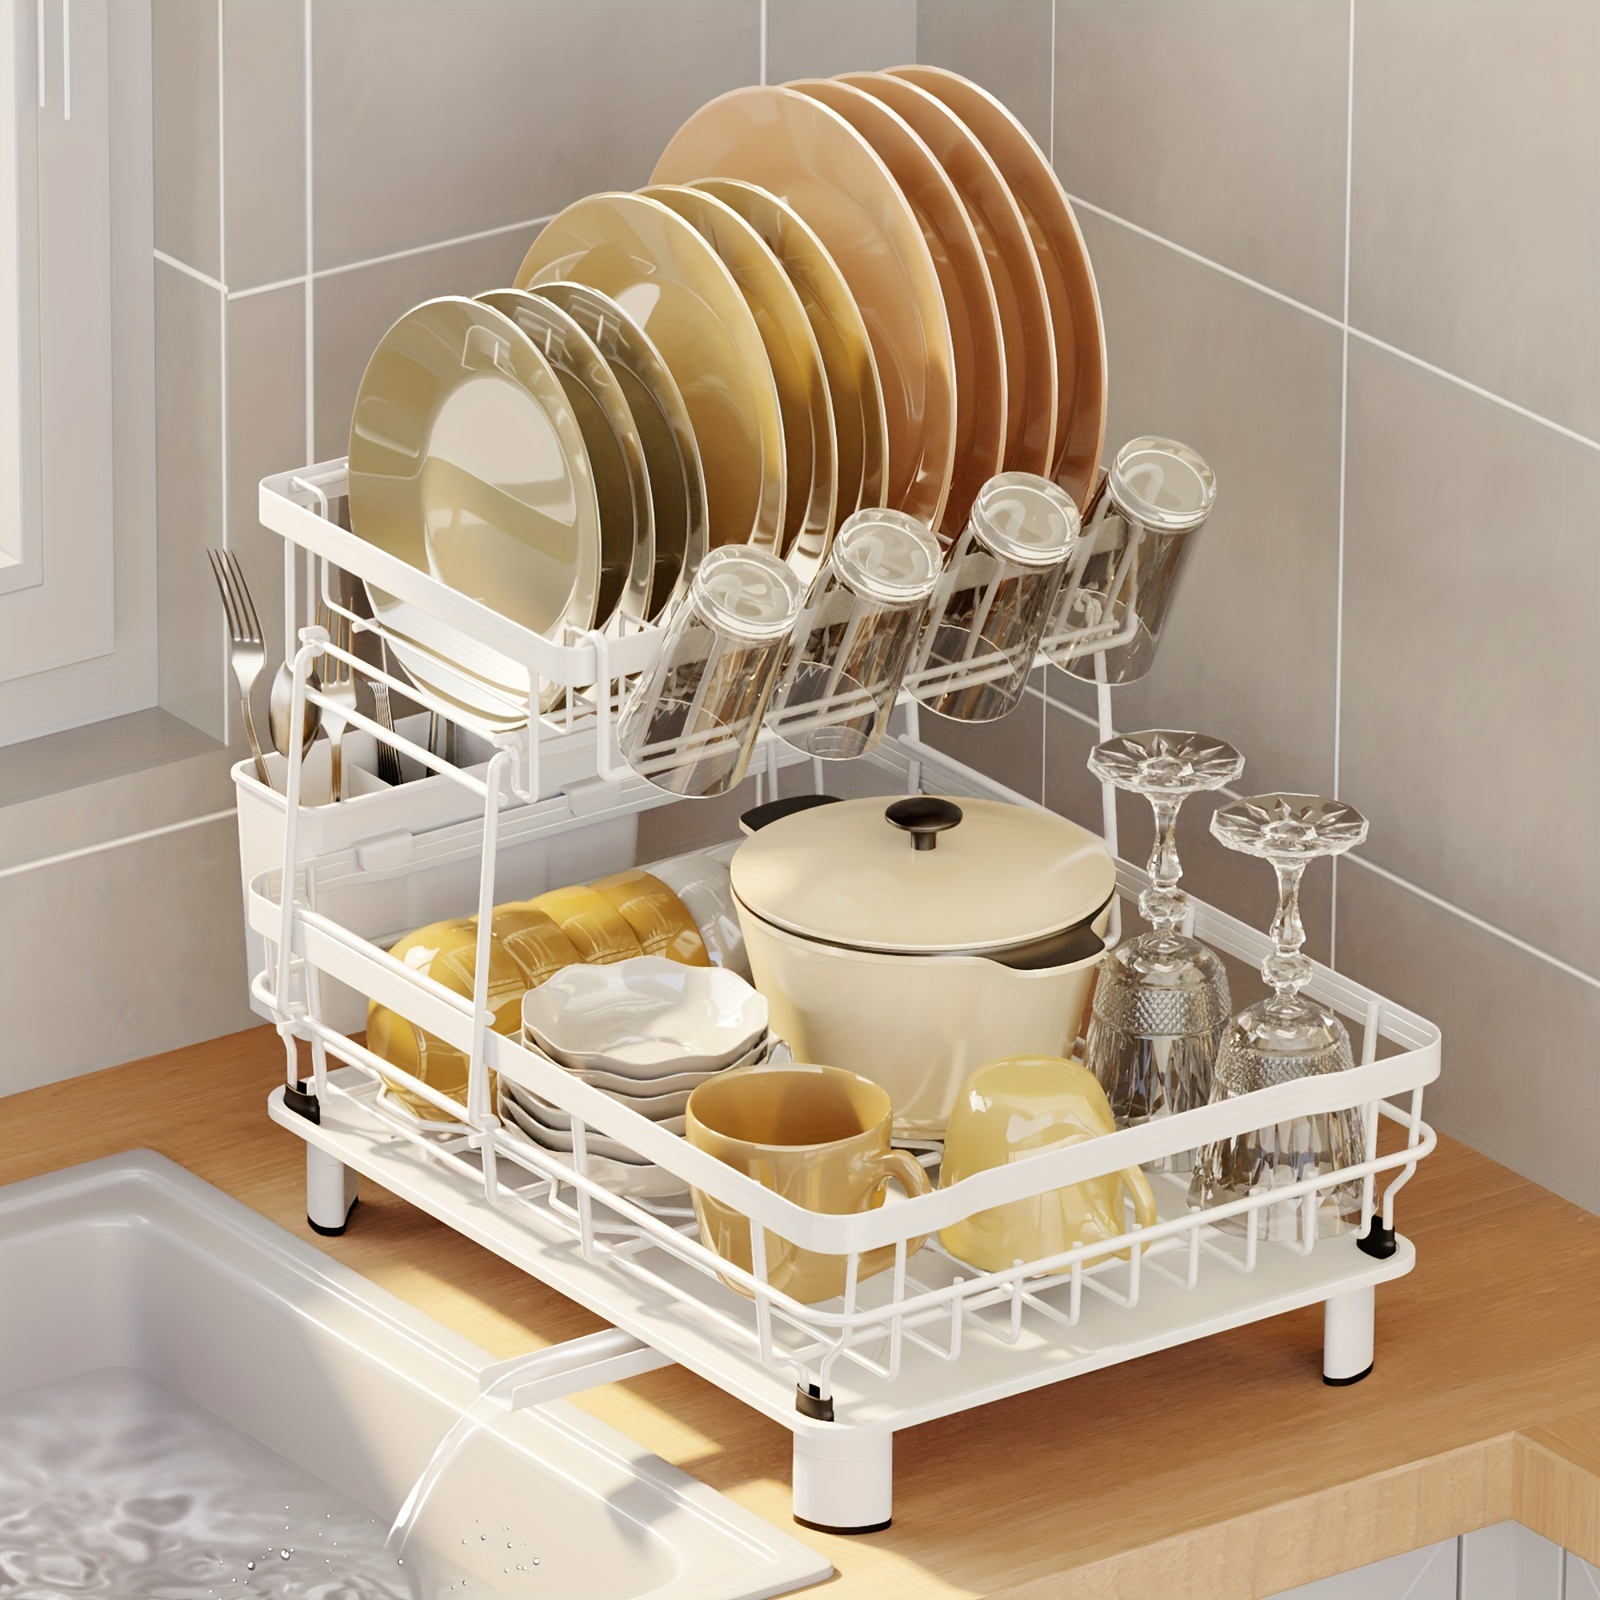 Kitchen Details Large, Draining Tray, Rust Resistant, Stylish Industrial  Collection Dish Drying Rack, Grey